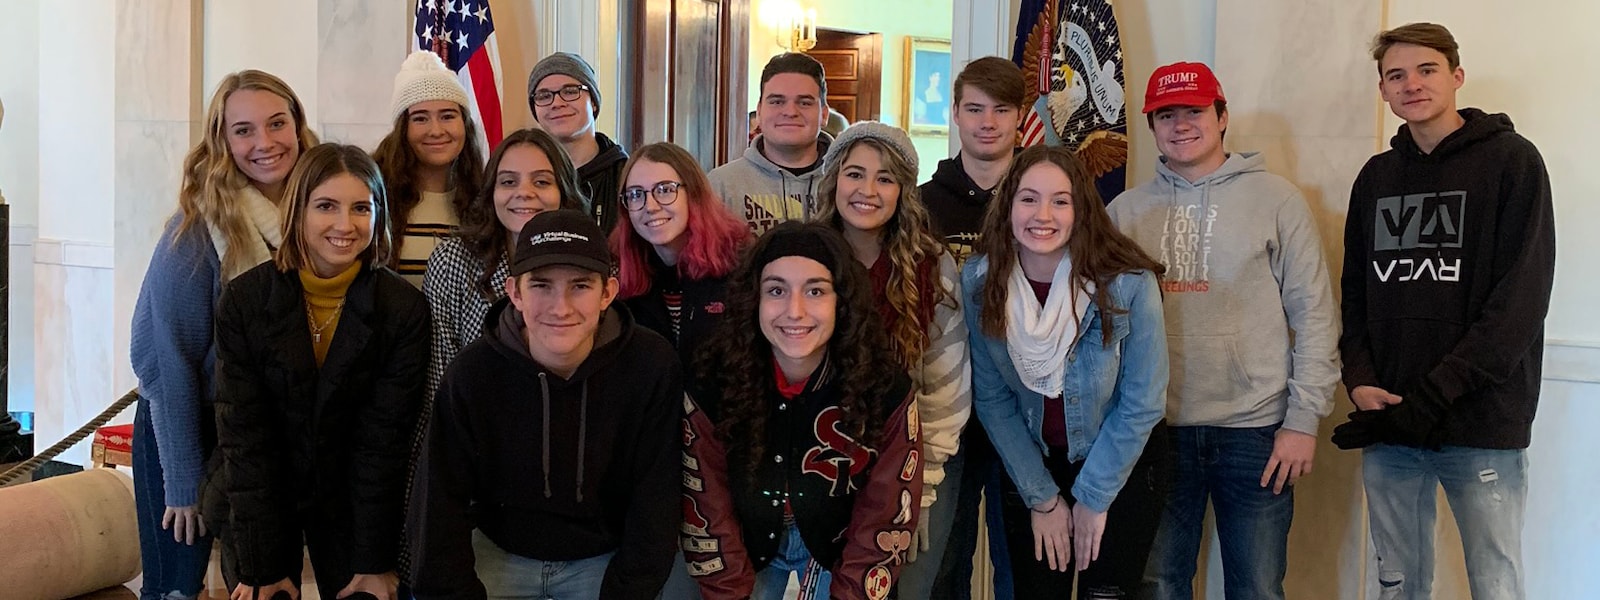 Shadow Ridge DECA students pose for a photo in Washington D.C.